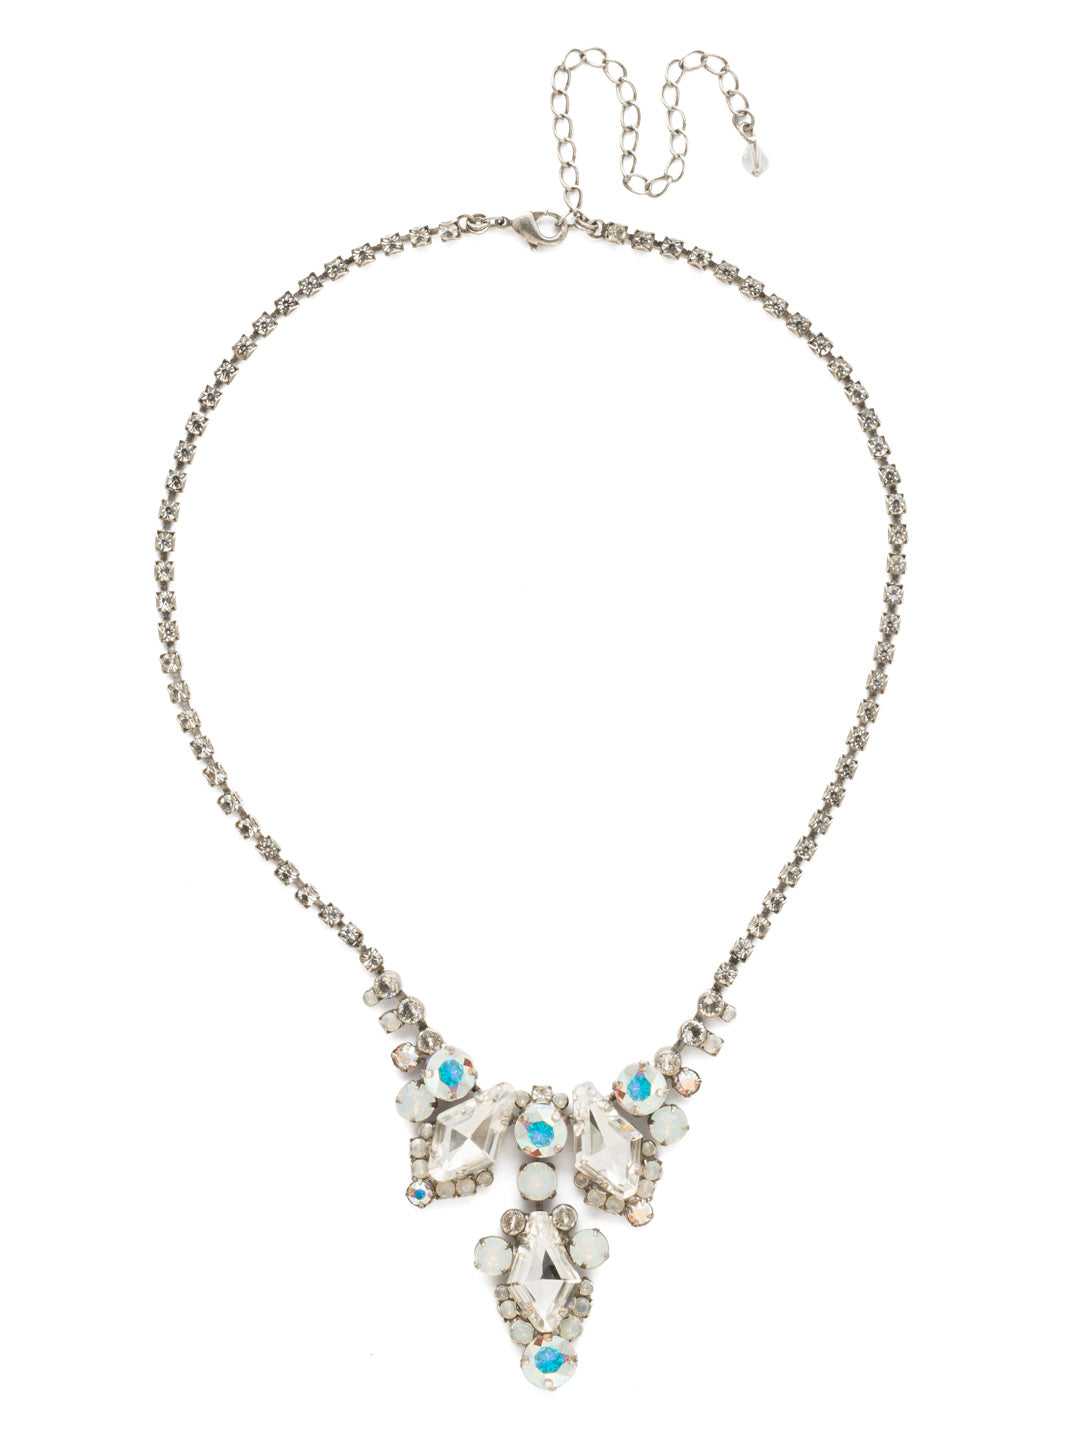 Alder Statement Necklace - NDT10ASWBR - <p>Three rhombus crystals are accented with glimmering rounds in this simple, chic style. From Sorrelli's White Bridal collection in our Antique Silver-tone finish.</p>